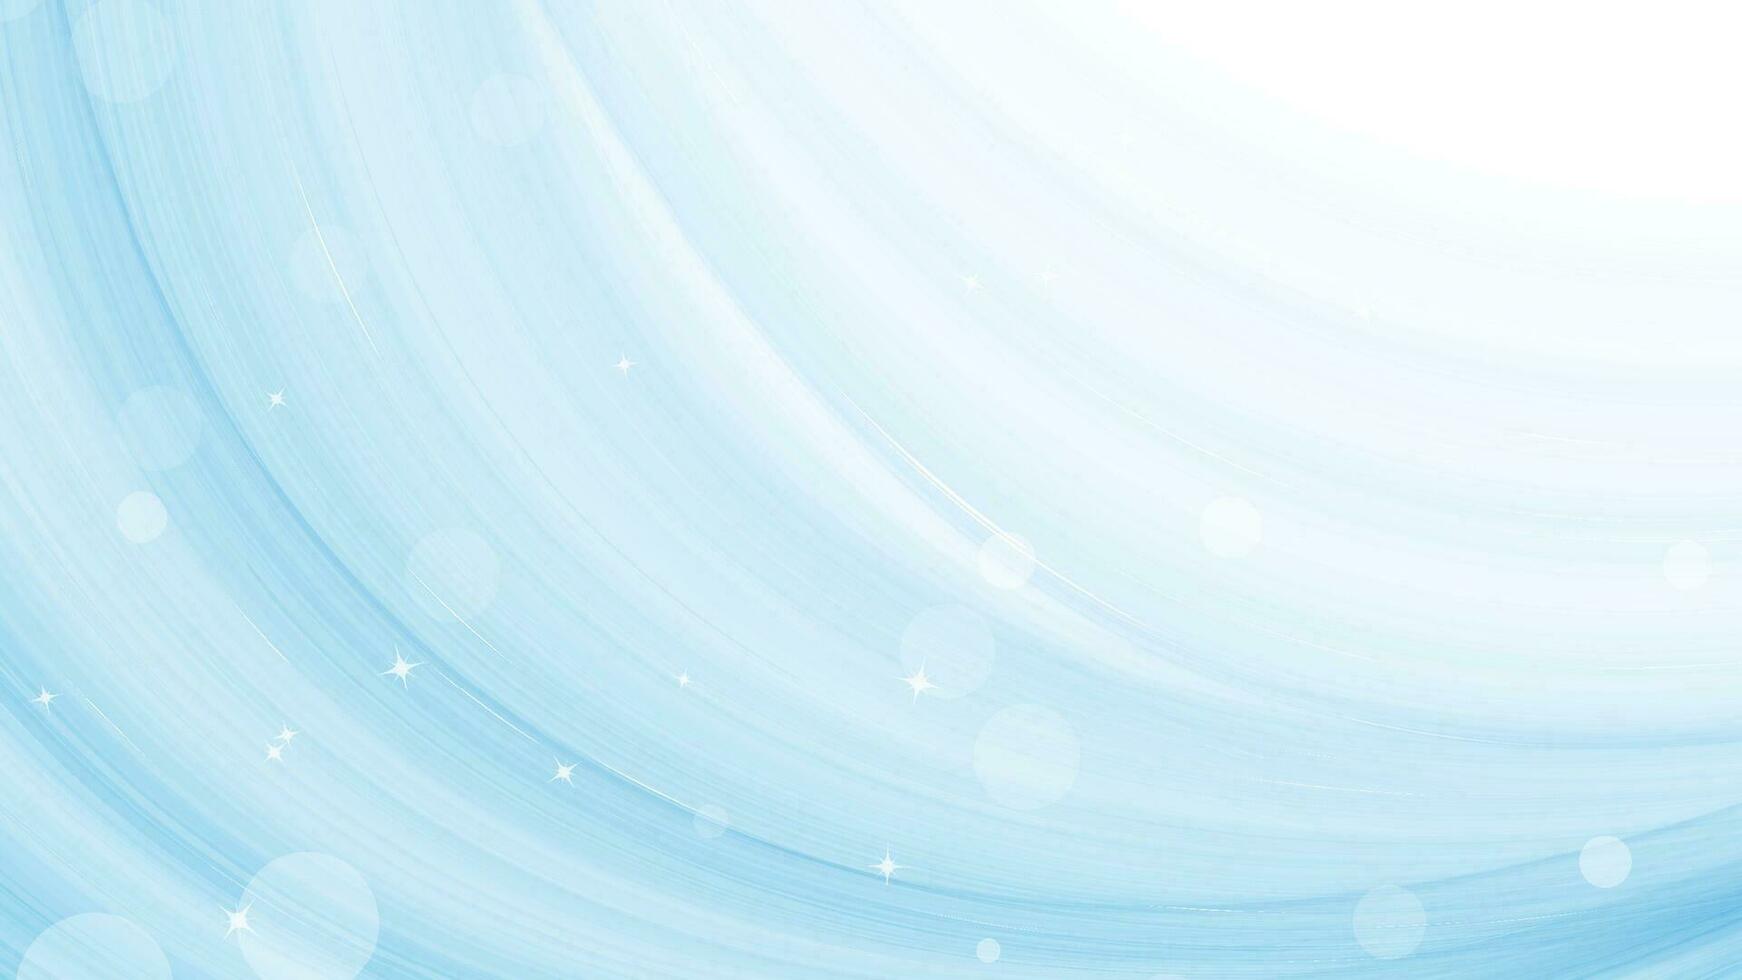 Abstract background creative star on blue wave watercolor background vector